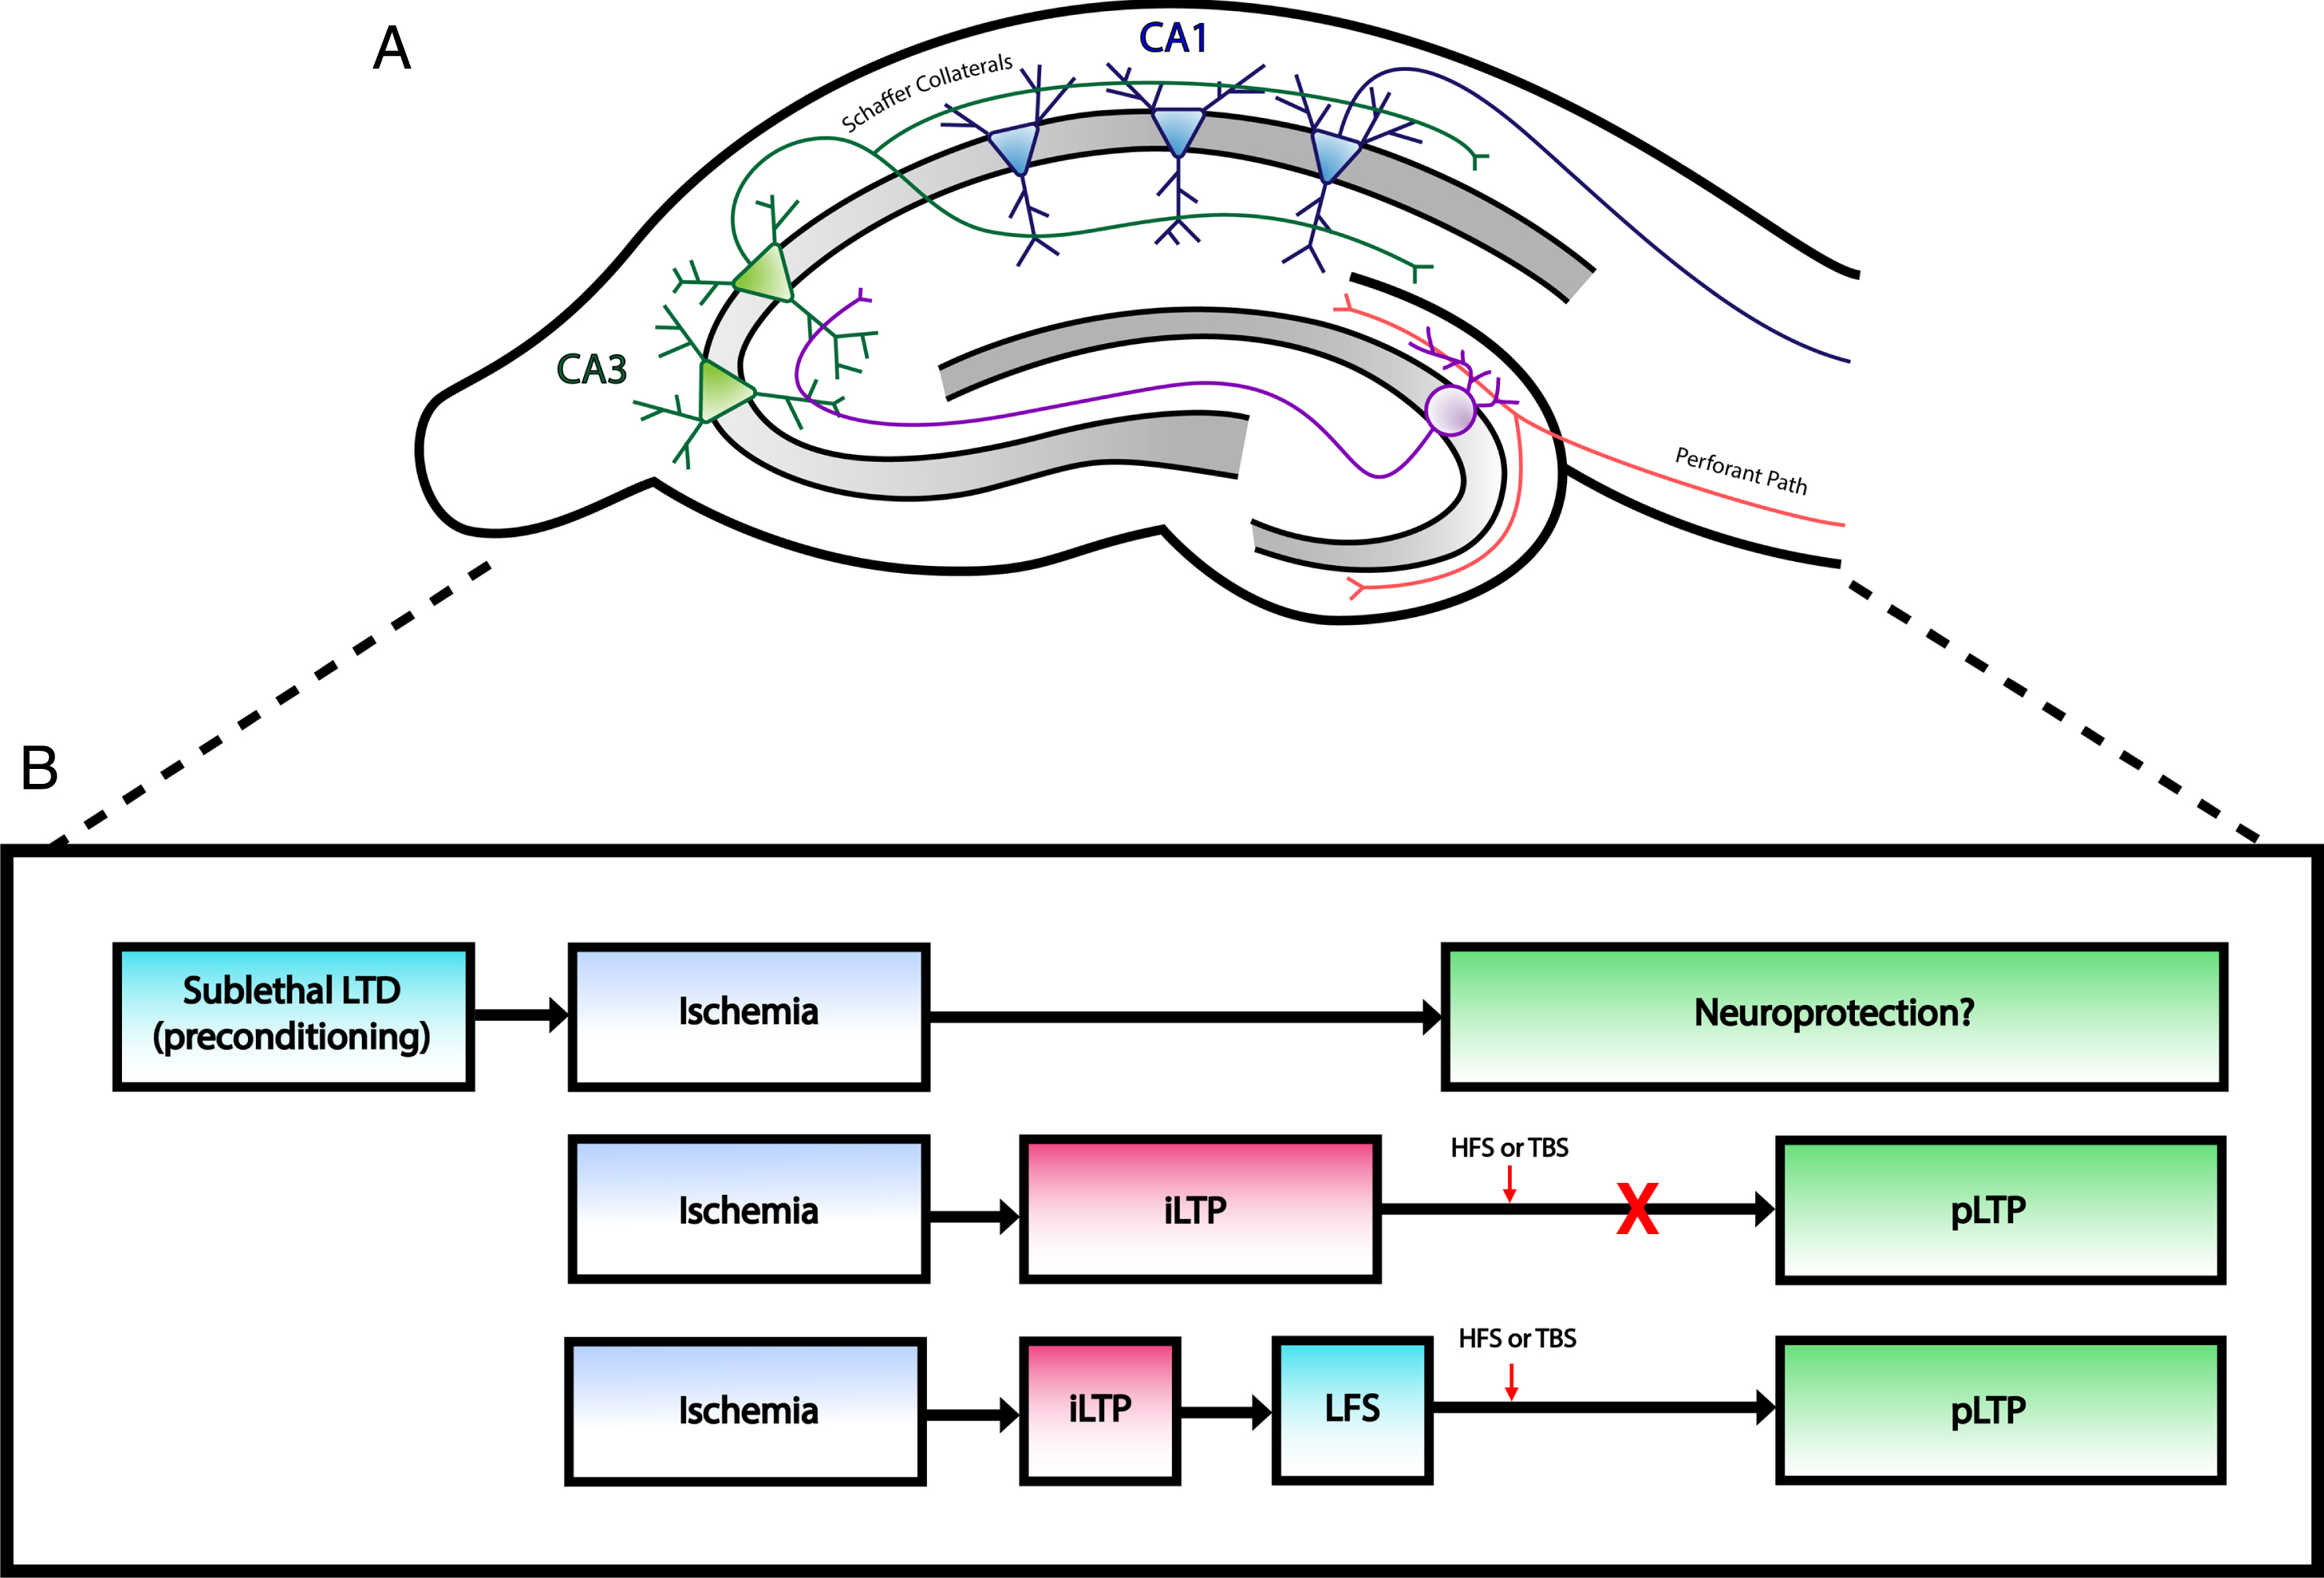 Changes at excitatory synapses after ischemia. A) Simplified illustration of rodent hippocampal slice demonstrating the major excitatory pathways within the hippocampal formation. Perforant path fibers innervate dendrites of granule cells in the dentate gyrus, which project to CA3 neurons via mossy fibers. CA1 neurons receive input from CA3 neurons through Schaffer collaterals. Typical hippocampal field recordings involve electrical stimulation of Schaffer collaterals, which generate EPSPs that can be recorded from CA1 dendrites. B) Outline of long term synaptic plasticity changes after ischemia. Top: Induction of LTD prior to an ischemic insult may act as a neuroprotective intervention against CI as studies have shown decreased neuronal cell death following LTD preconditioning. Middle: Ischemia induces a pathological form of plasticity (iLTP) that prevents physiological LTP (pLTP). Bottom: Low frequency stimulation (LFS) can depotentiate iLTP and allow neurons to express pLTP following HFS or TBS.